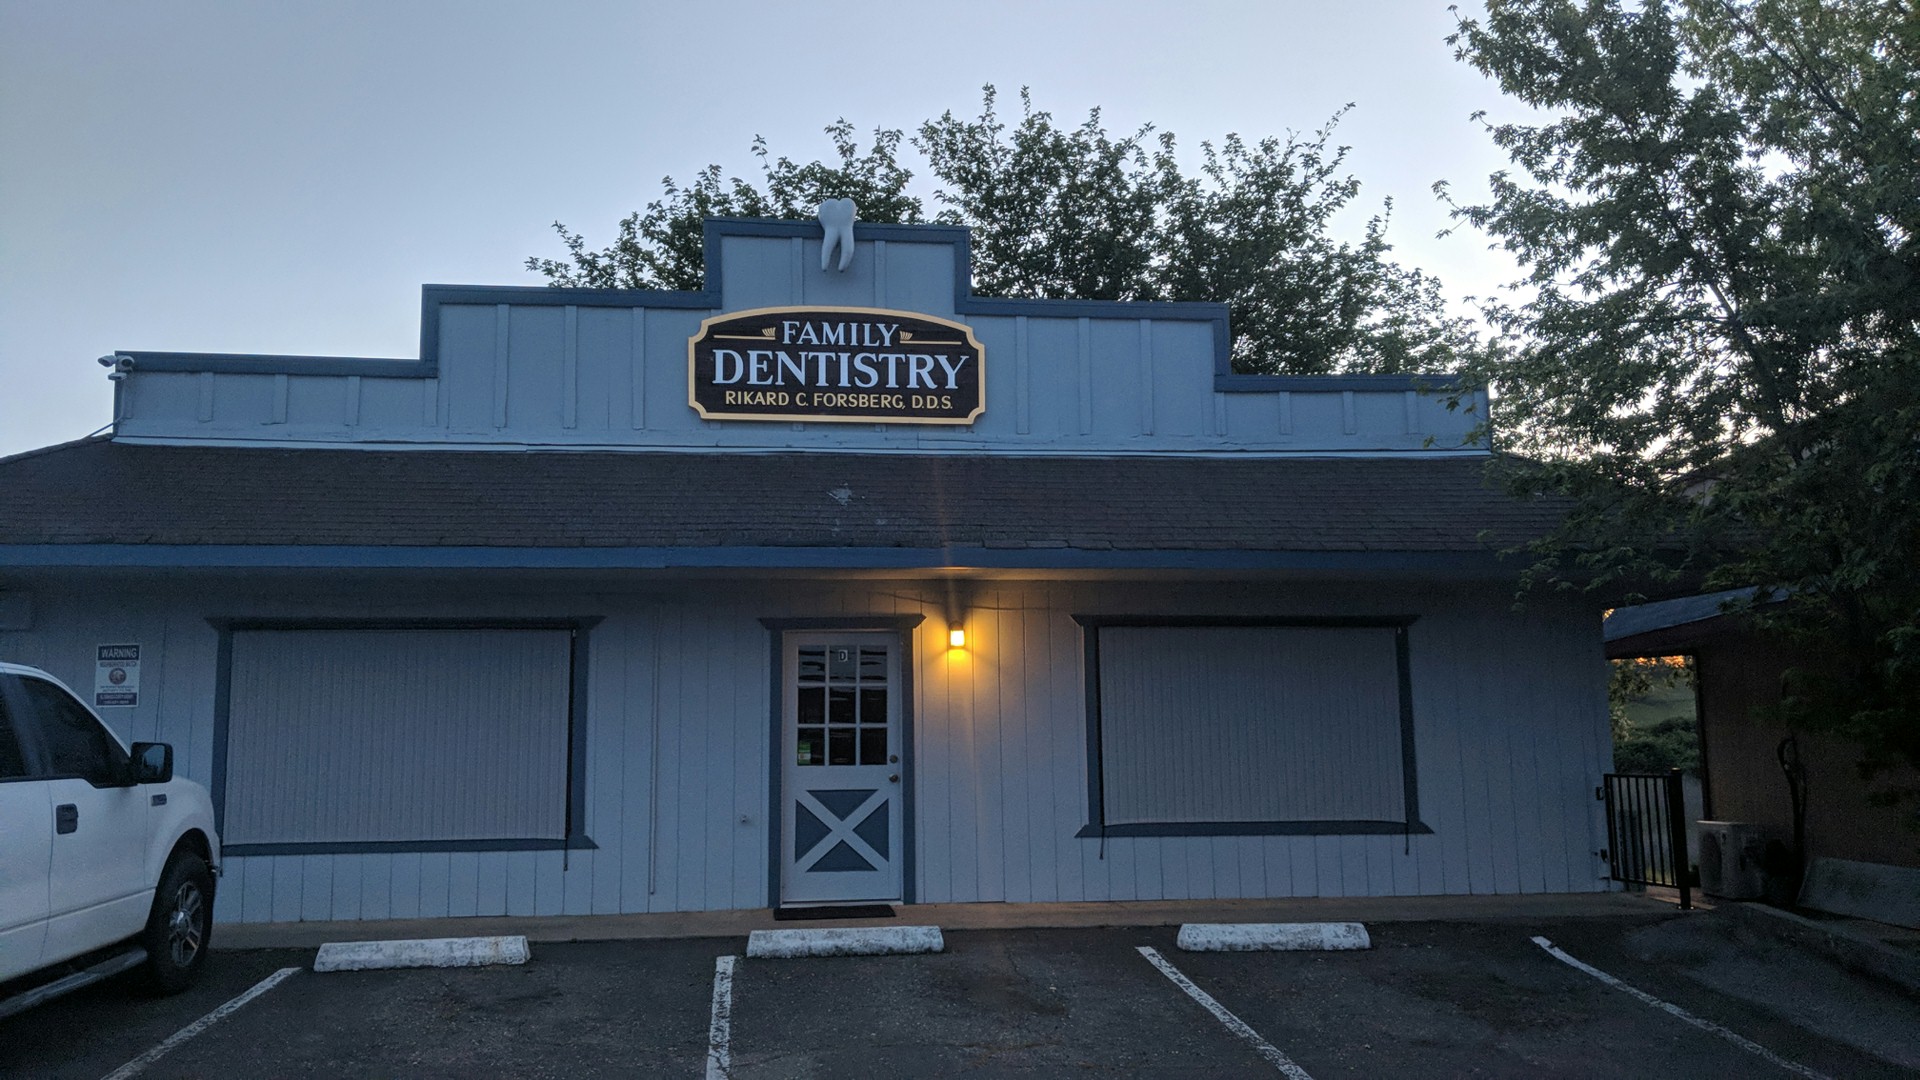 Cool Family Dentistry - Thomas M. Clements, DDS, Inc. 9490, 3006 CA-49 Ste D, Cool California 95614